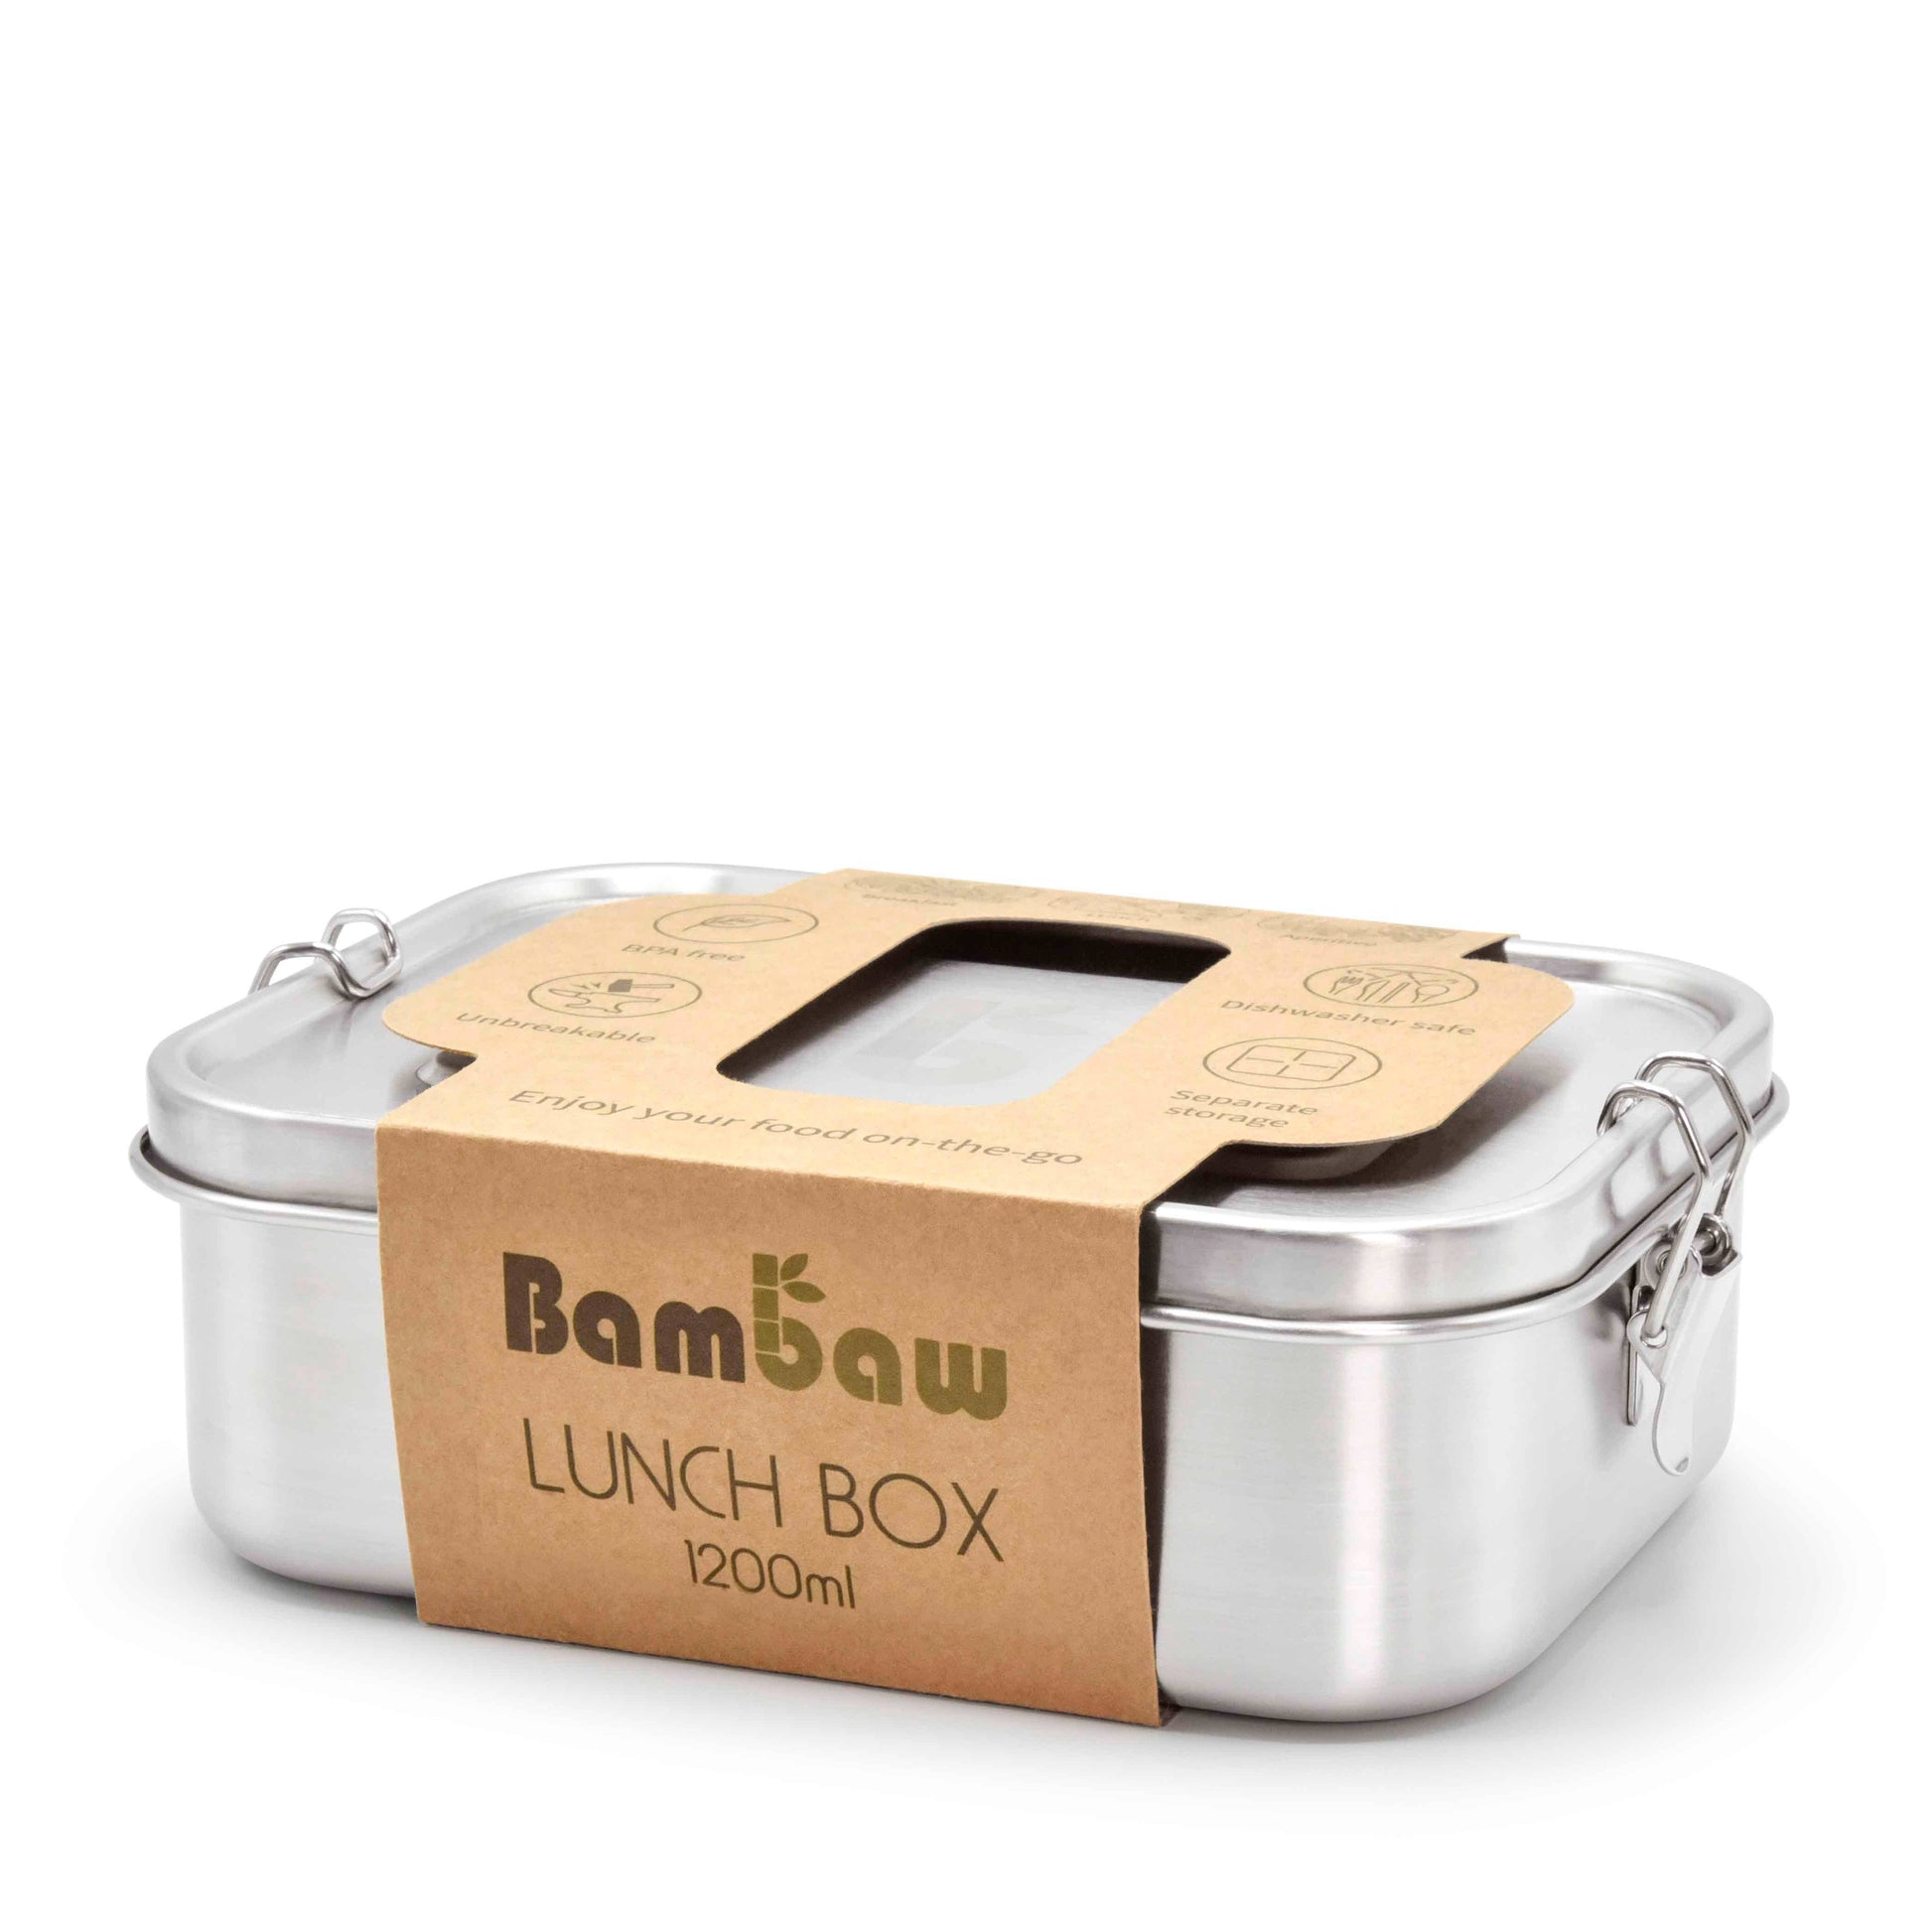 Stainless Steel 1200ml Lunch Box